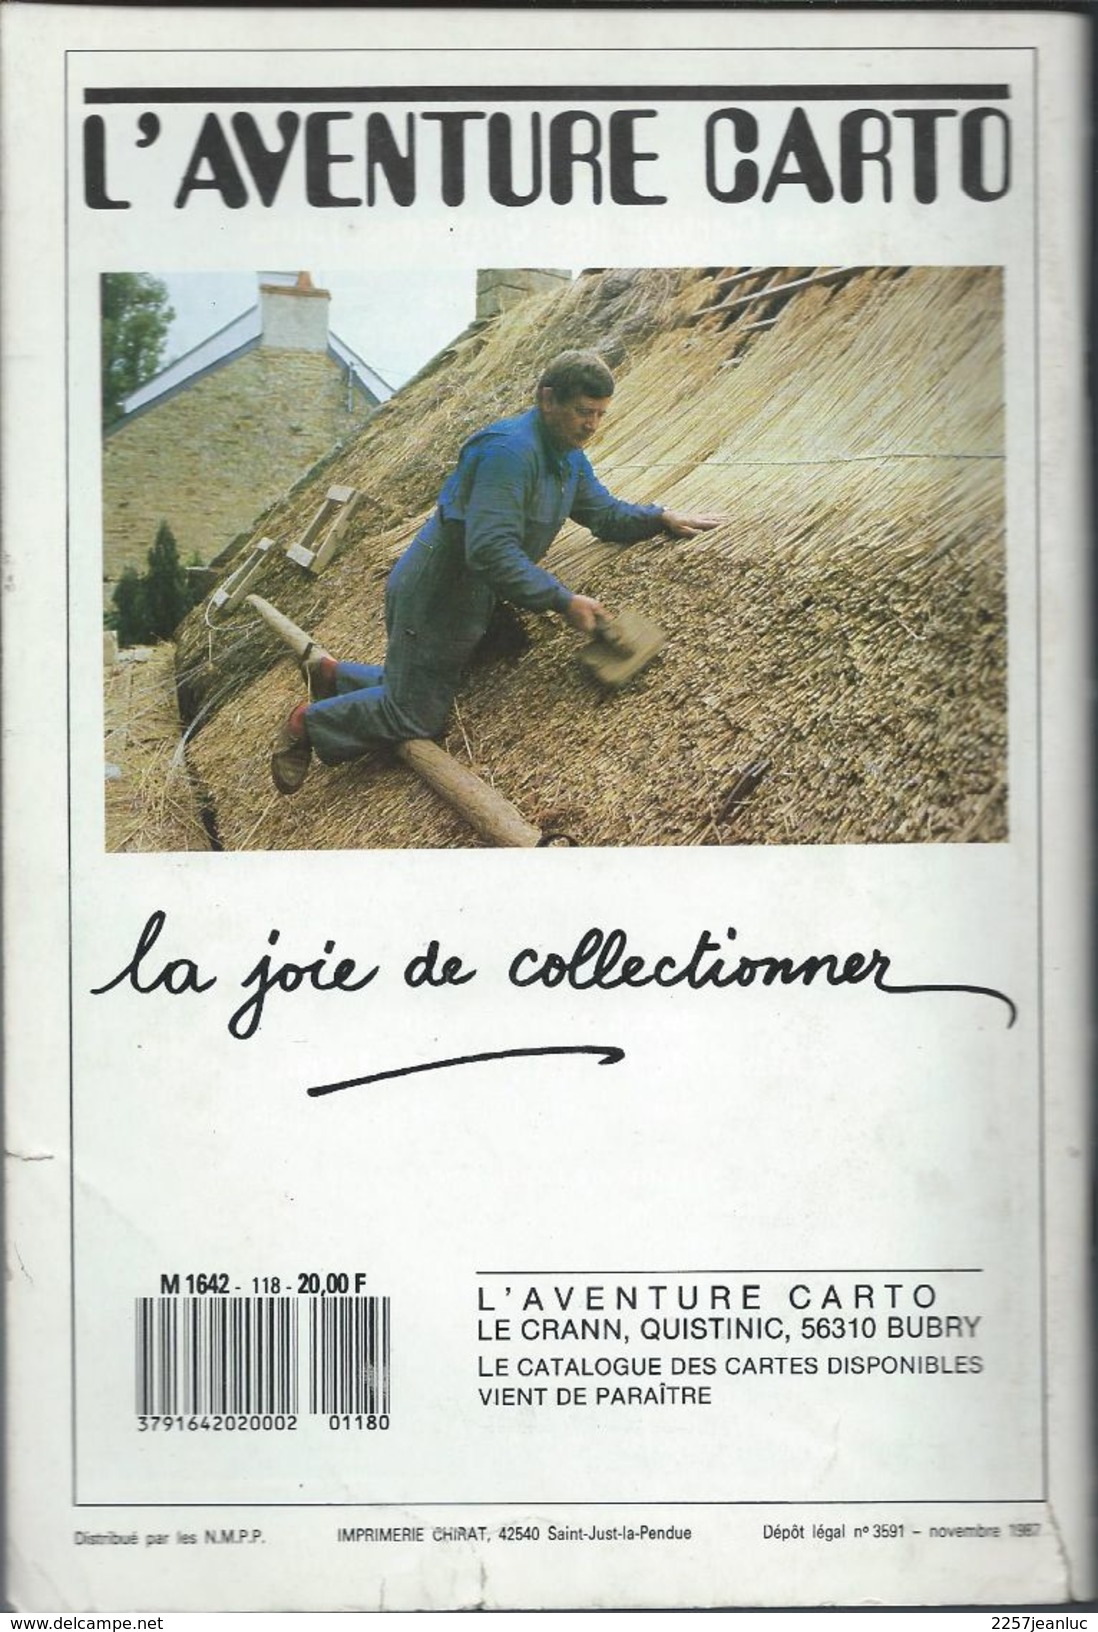 Cartes Postales Et Collections Avril 1988  Magazines N: 120 Llustration &  Thèmes Divers 120 Pages - French